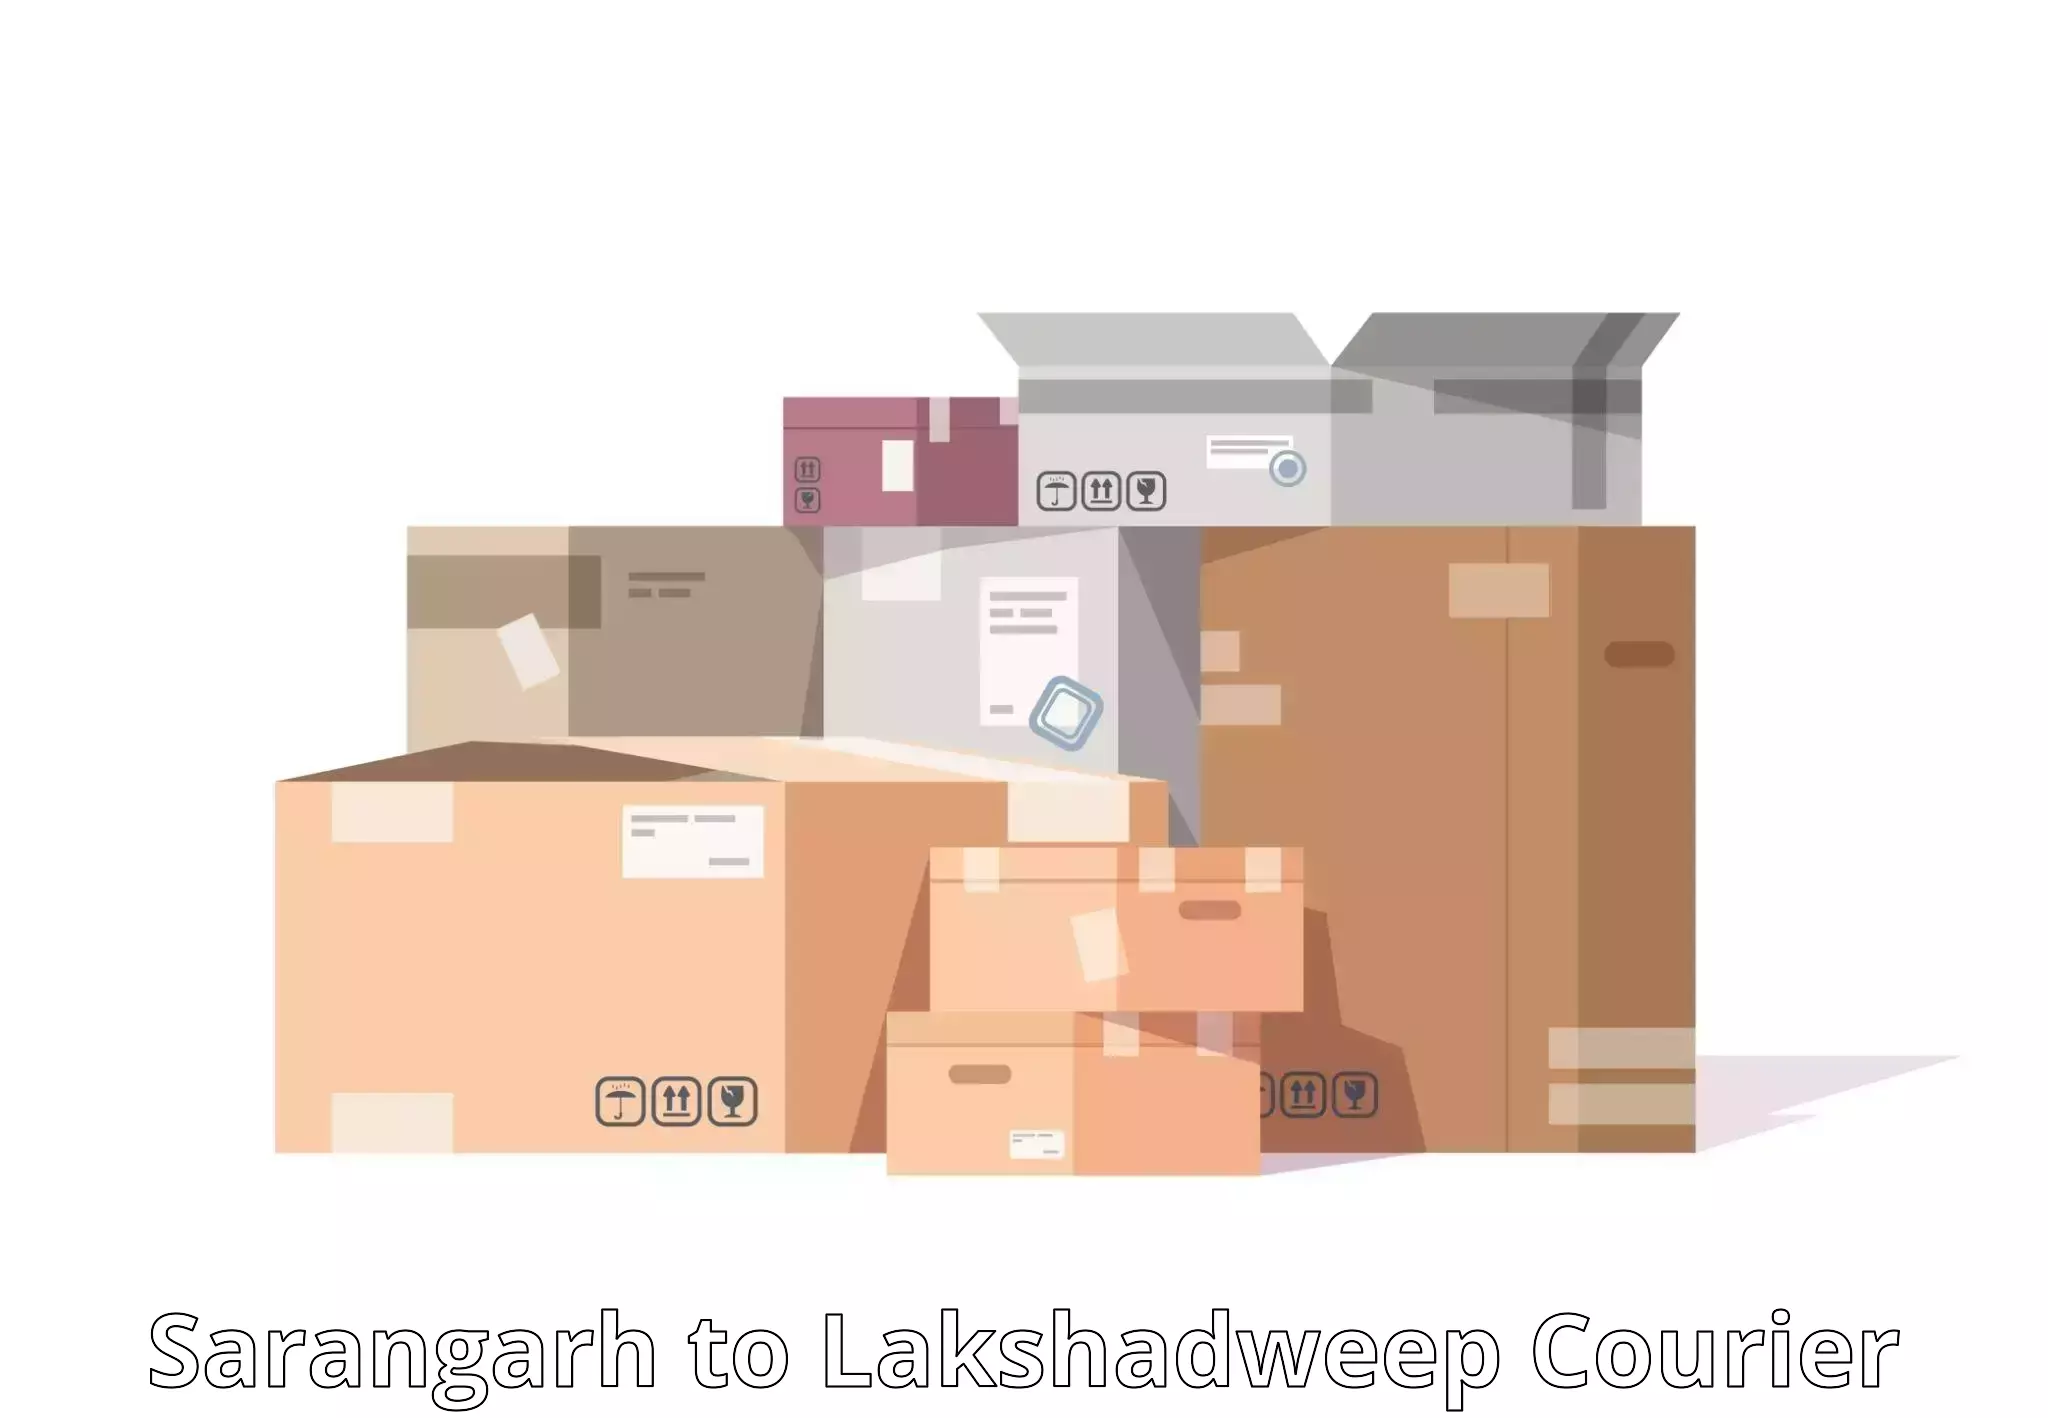 End-to-end delivery Sarangarh to Lakshadweep